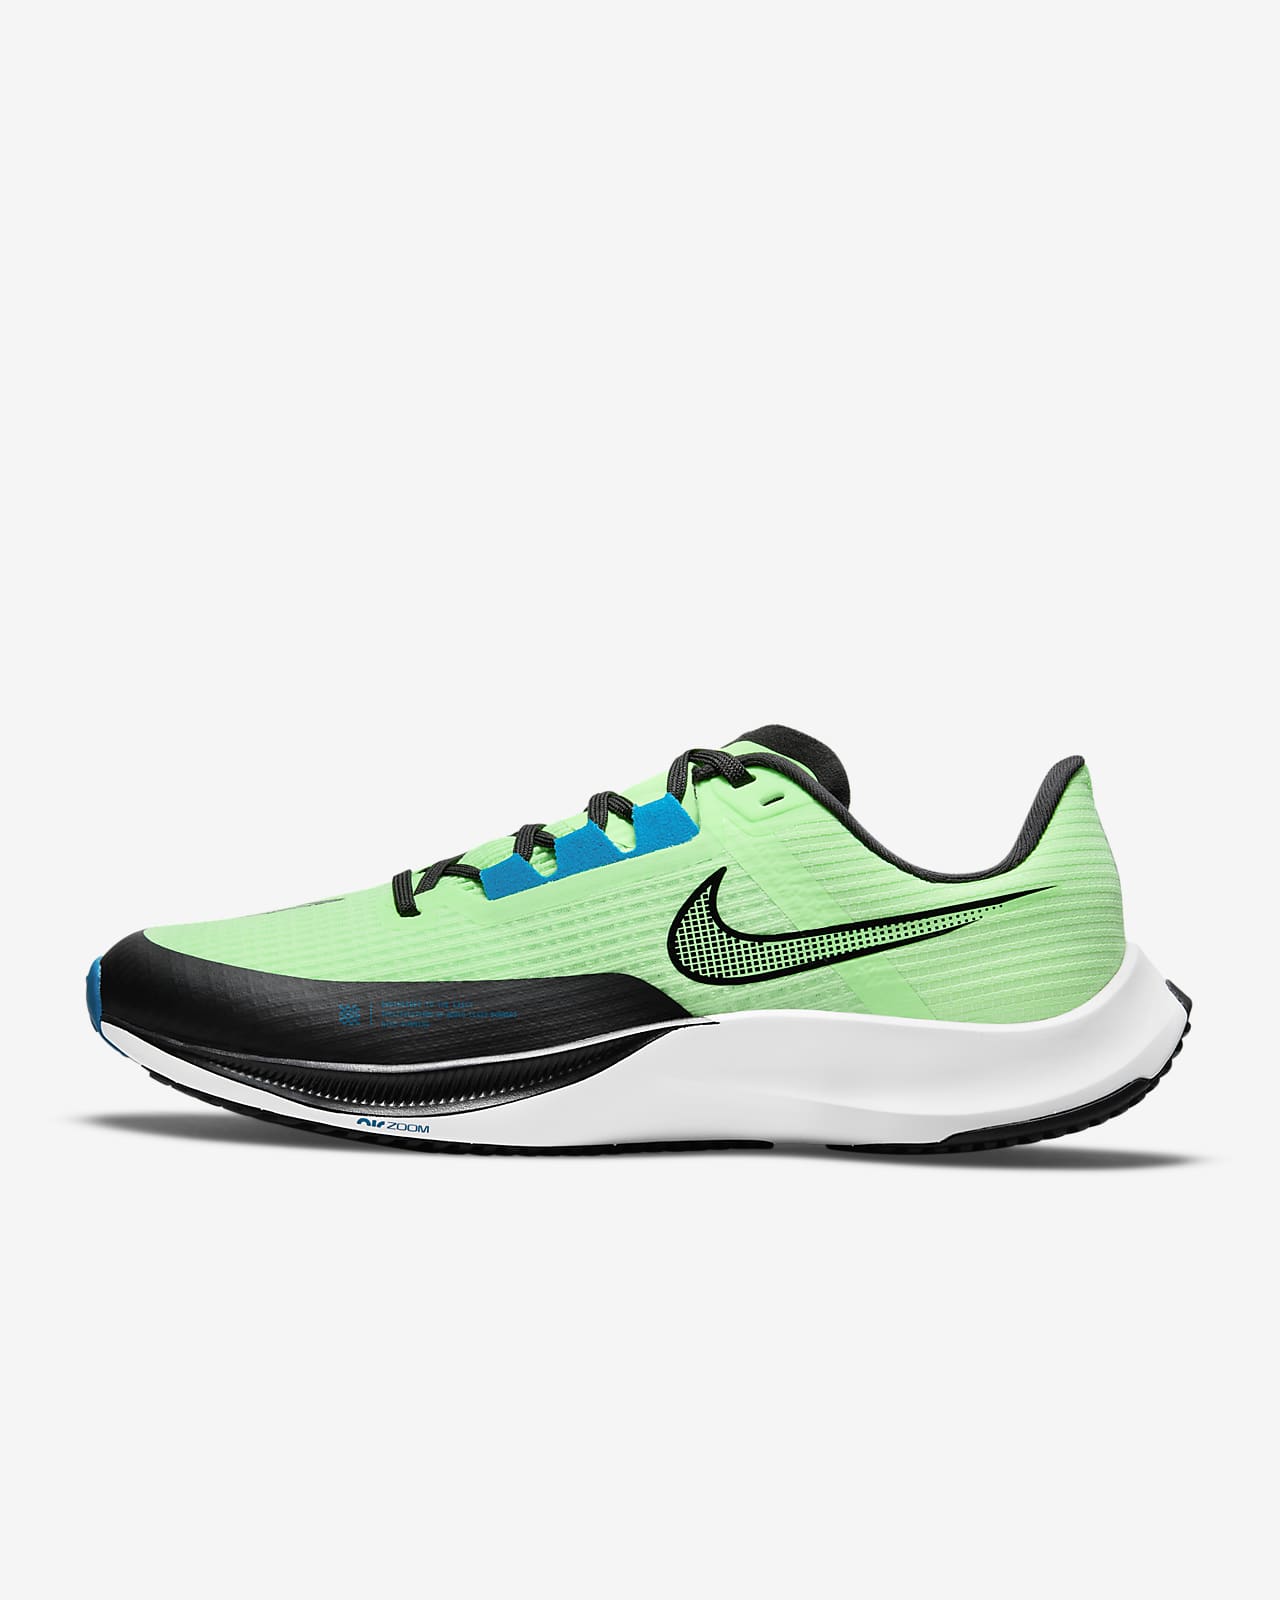 Nike Air Zoom Rival Fly 3 Men's Road Racing Shoes